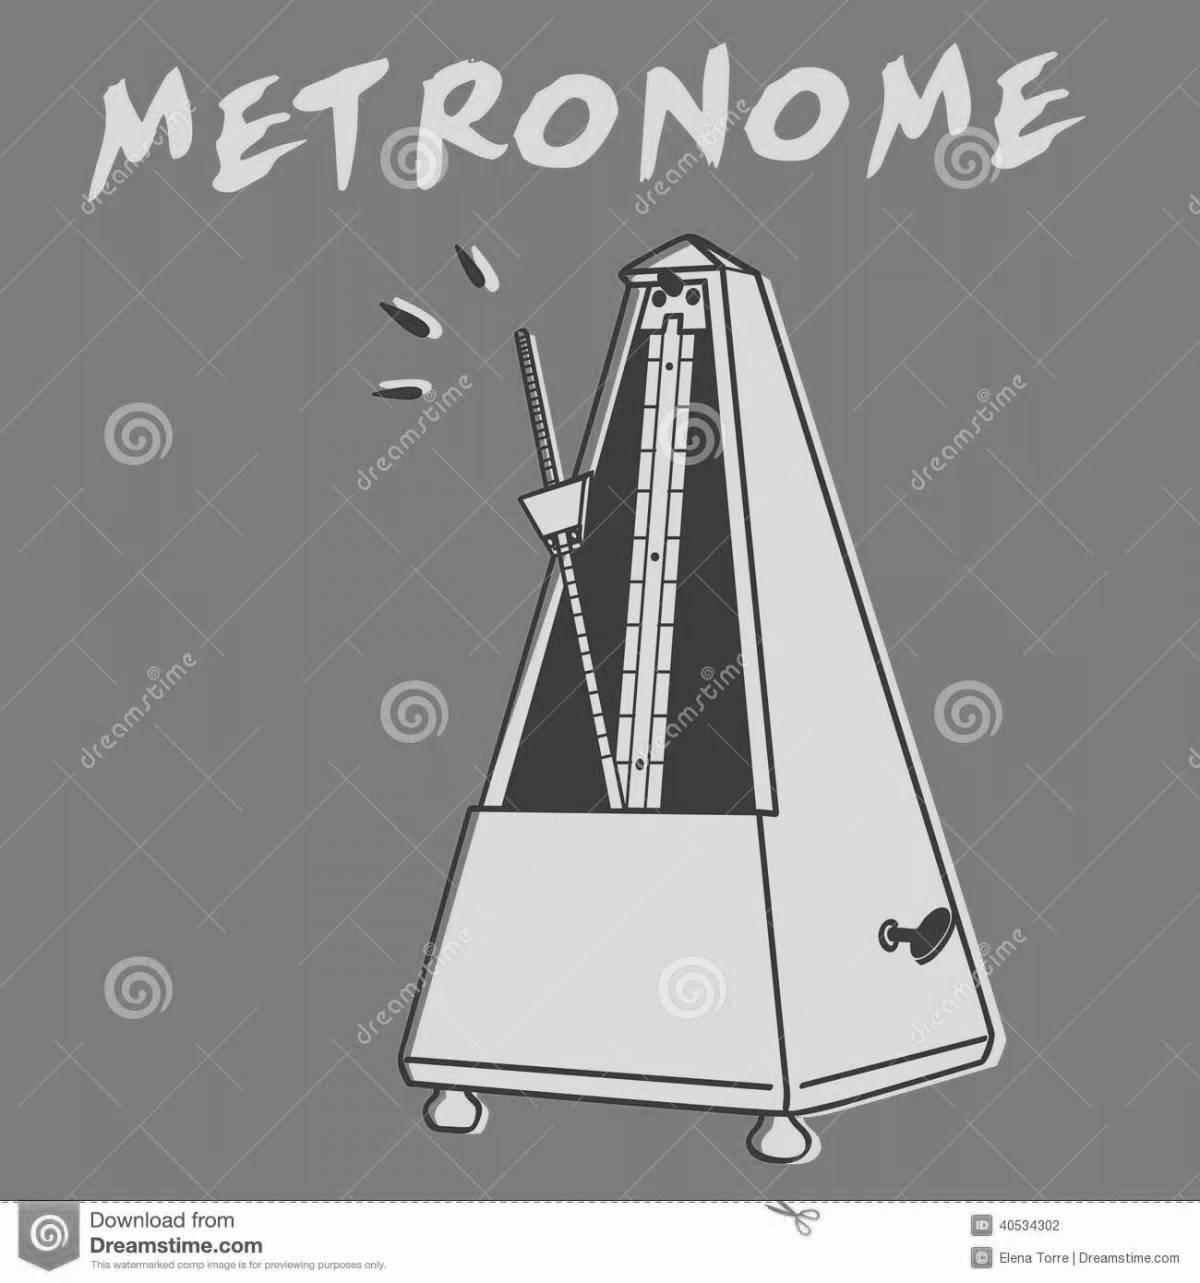 Playful metronome coloring page